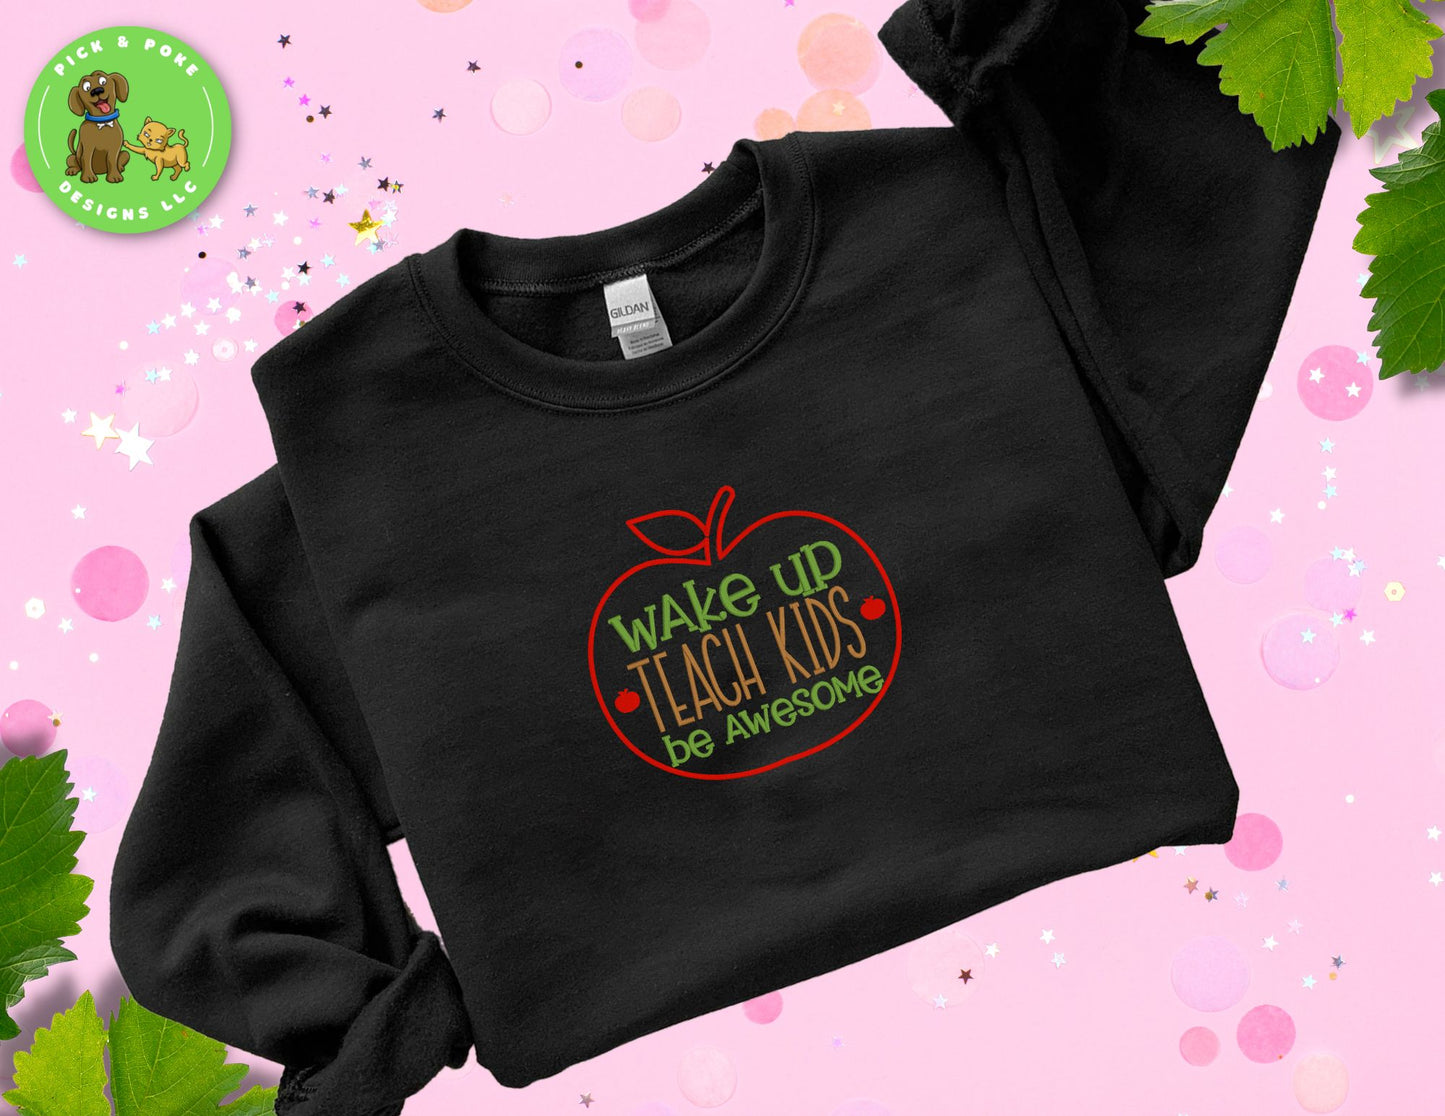 Black teacher crewneck sweatshirt embroidered with the words "Wake Up, Teach Kids, Be Awesome" in a apple frame..